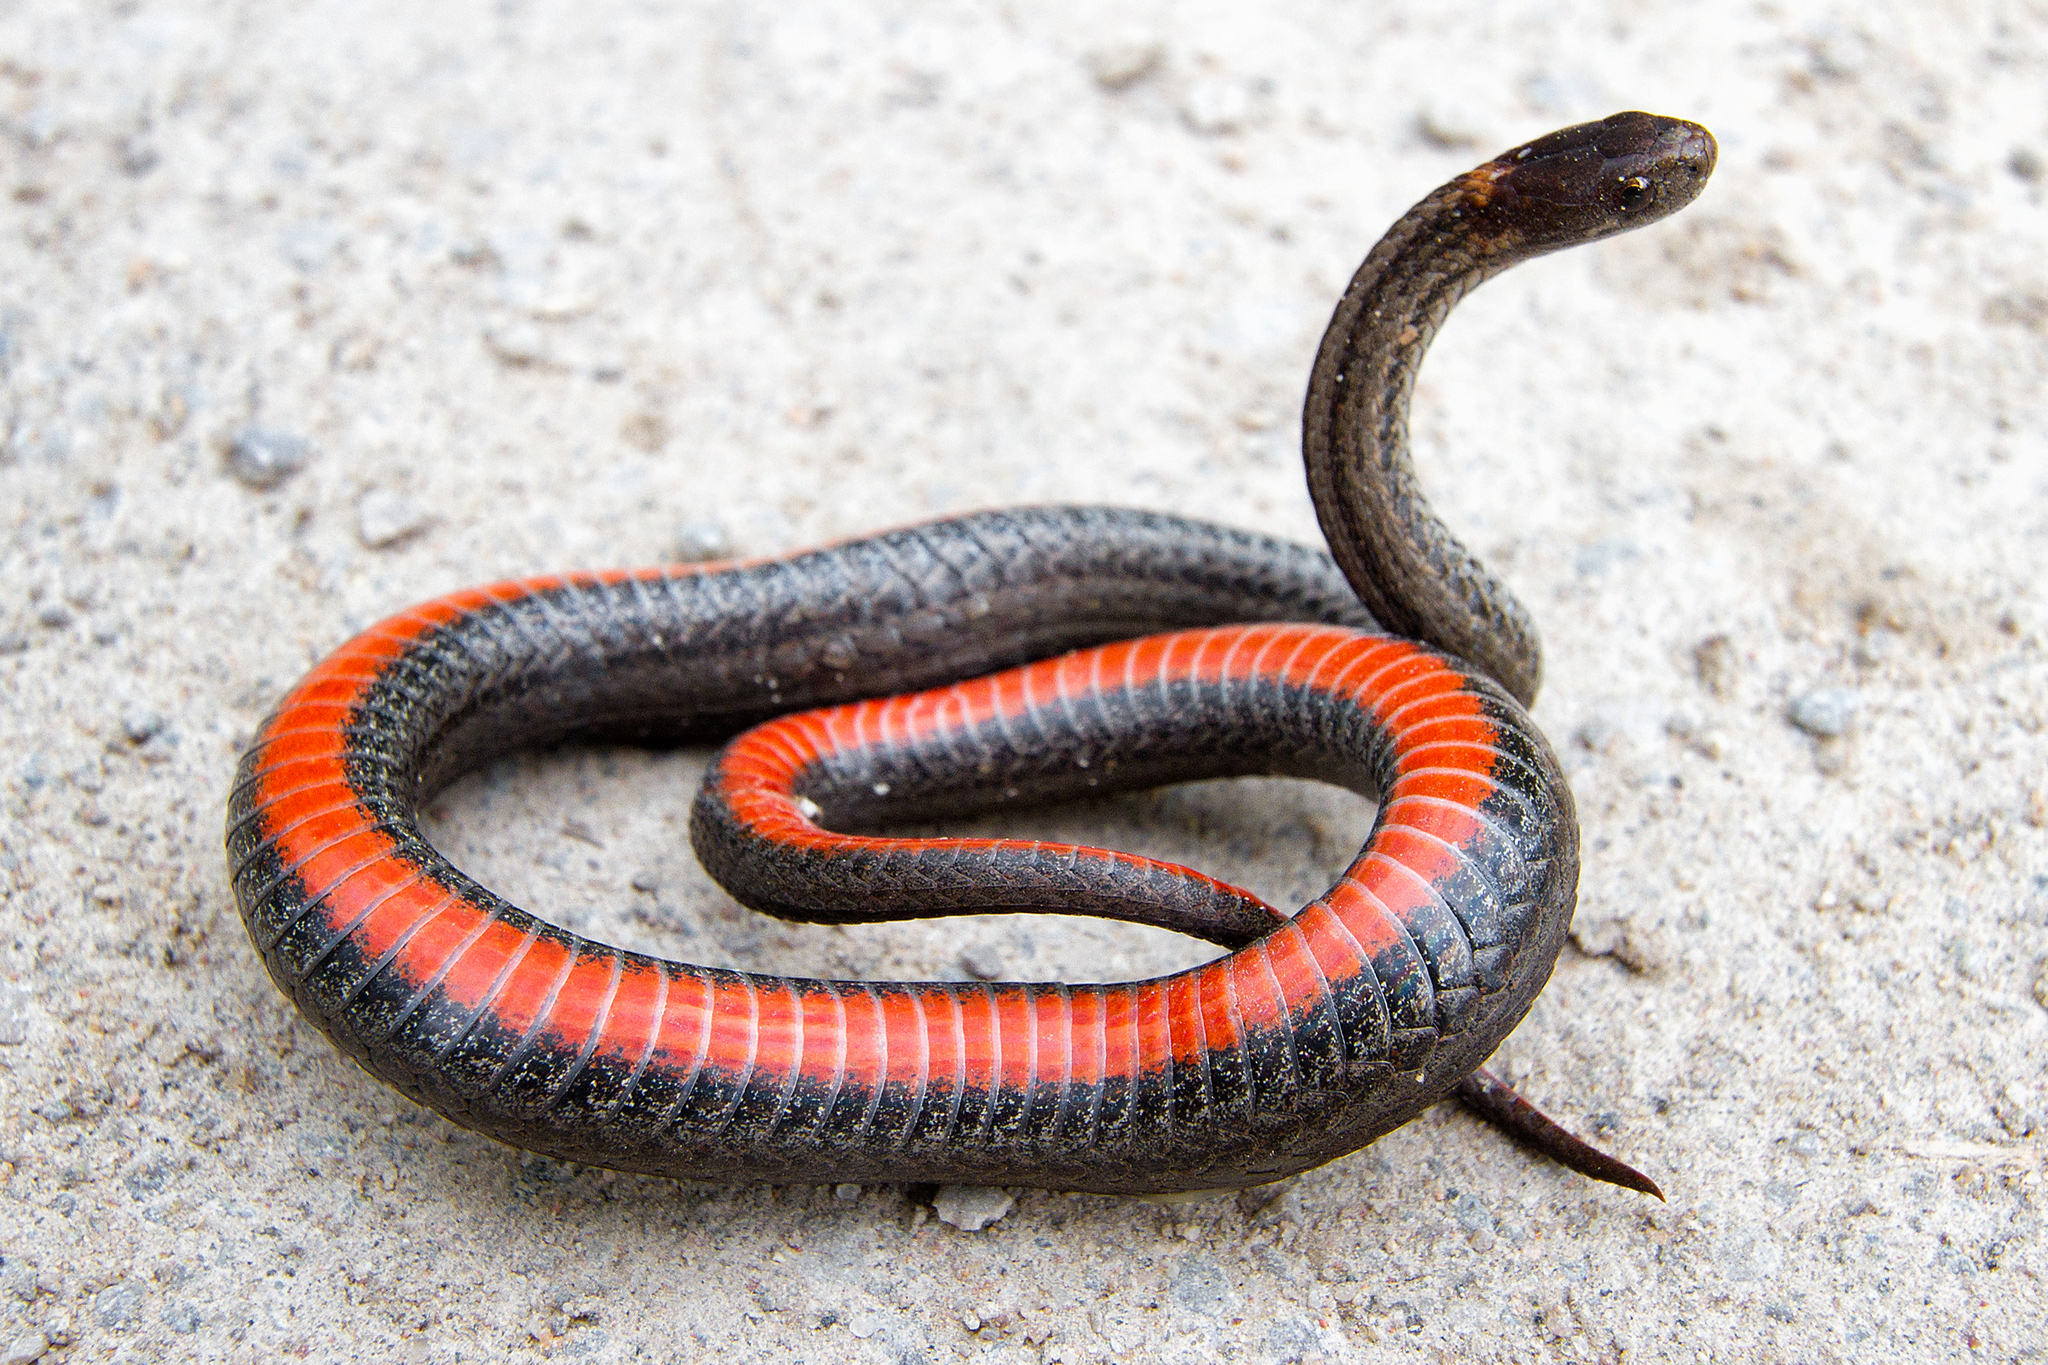 A black snake with a red belly lies coiled on the ground.